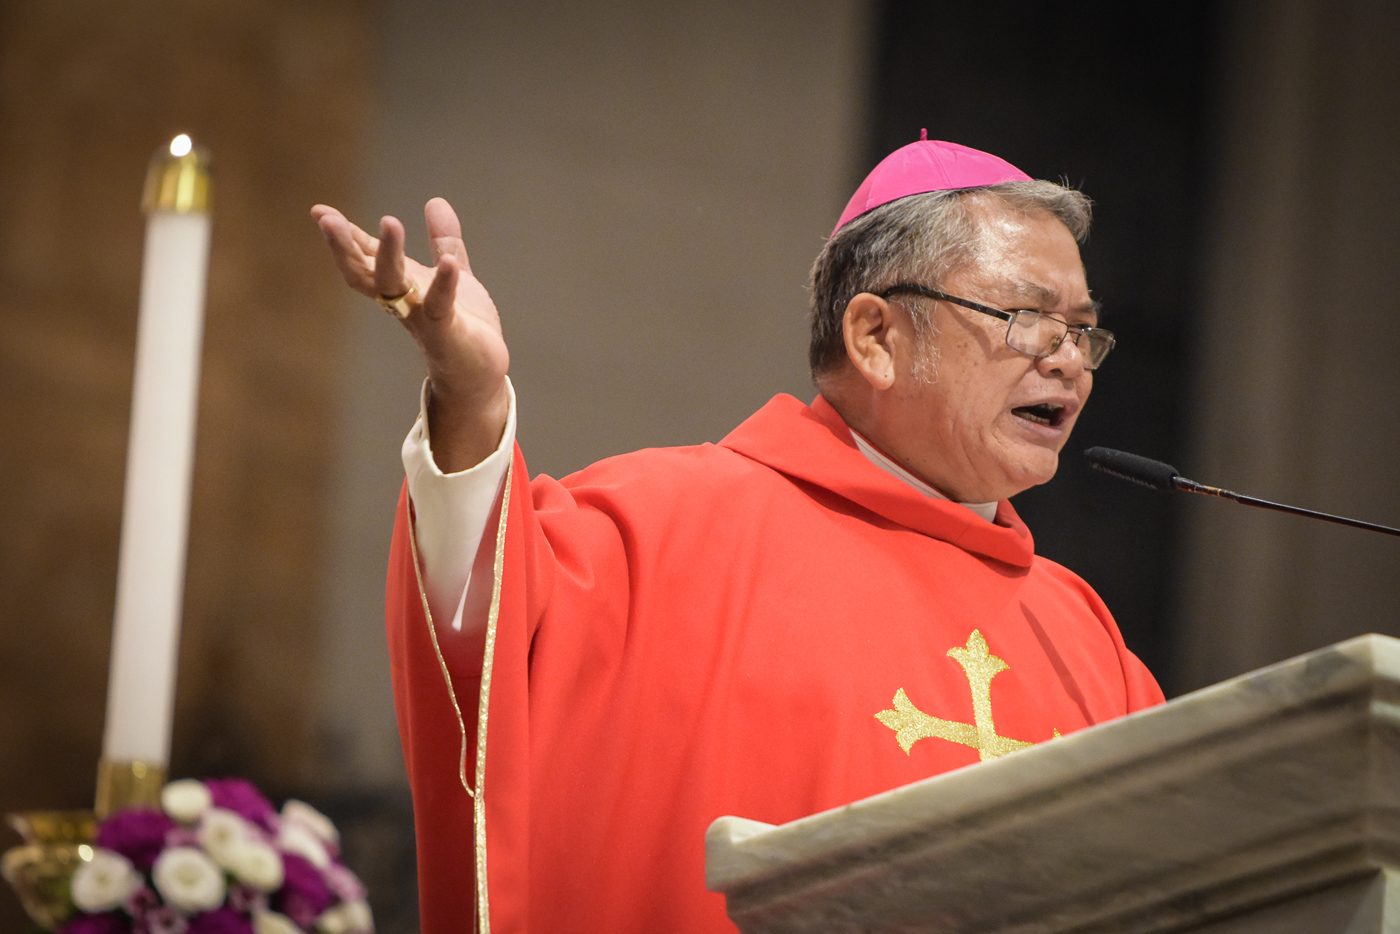 HORRORS OF WAR. Marawi Bishop Edwin dela Peña recounts the nearly 5-month war in Marawi City as he delivers the homily on November 22, 2017, dubbed as 'Red Wednesday' to support persecuted Christians worldwide. Photo by LeAnne Jazul/Rappler 